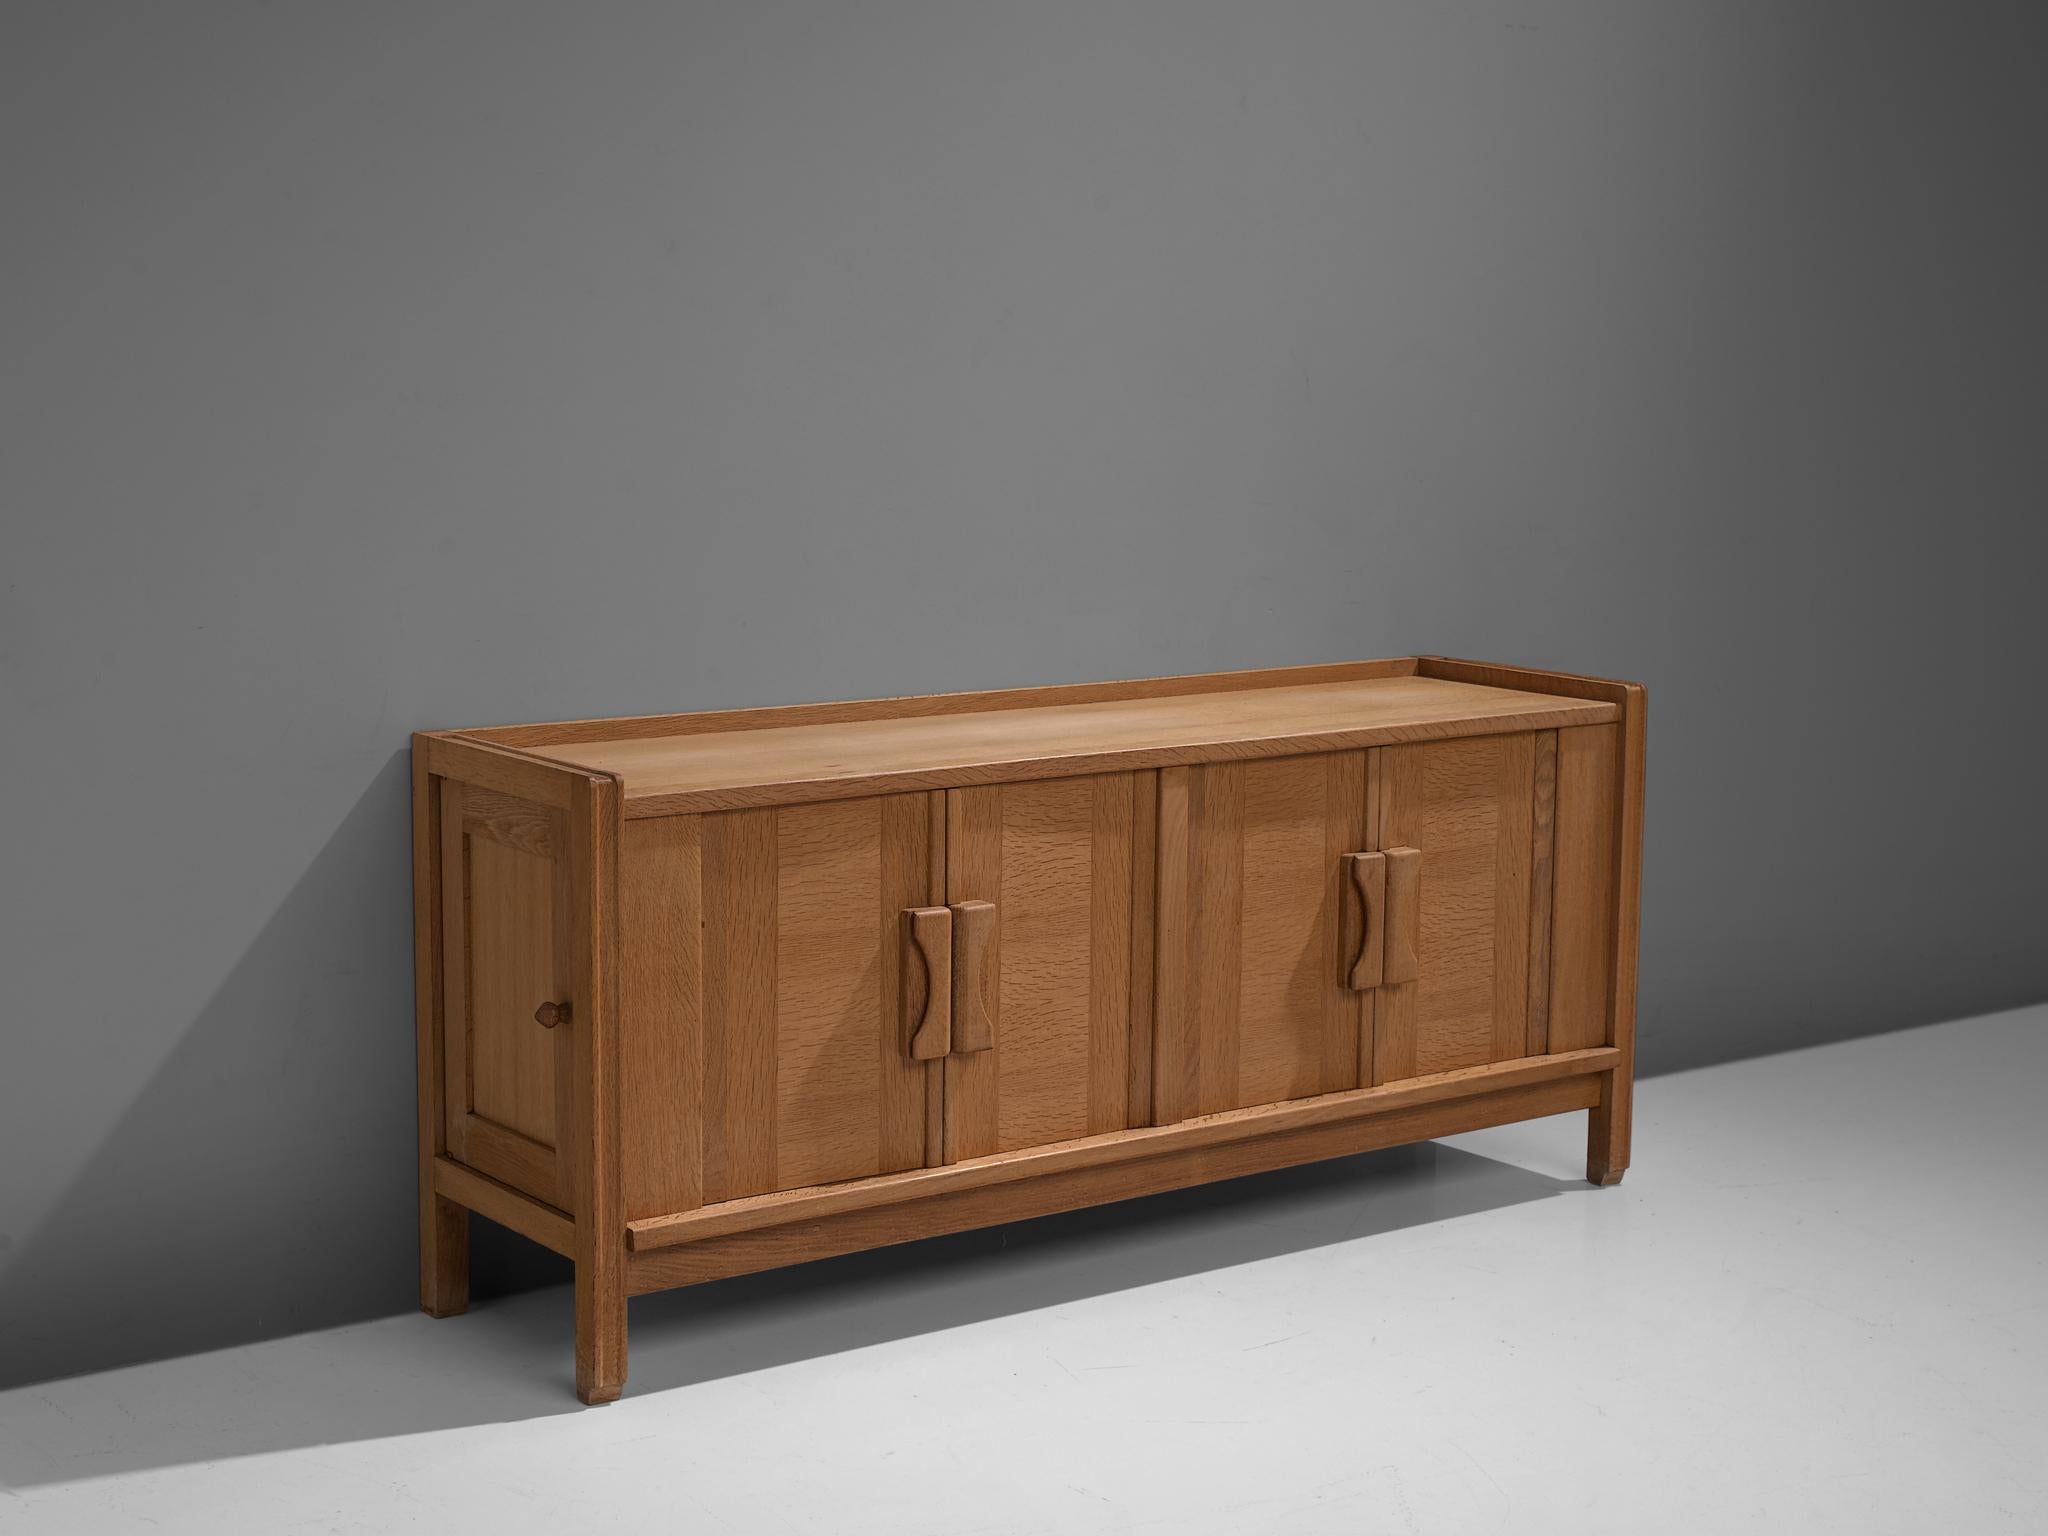 Guillerme et Chambron for Votre Maison, sideboard, oak, France, 1960s.

This quite solid cabinet holds beautiful inlayed woodwork. These graphical patterns are commonly used by Guillerme & Chambron. The sideboard consists of two storage units with